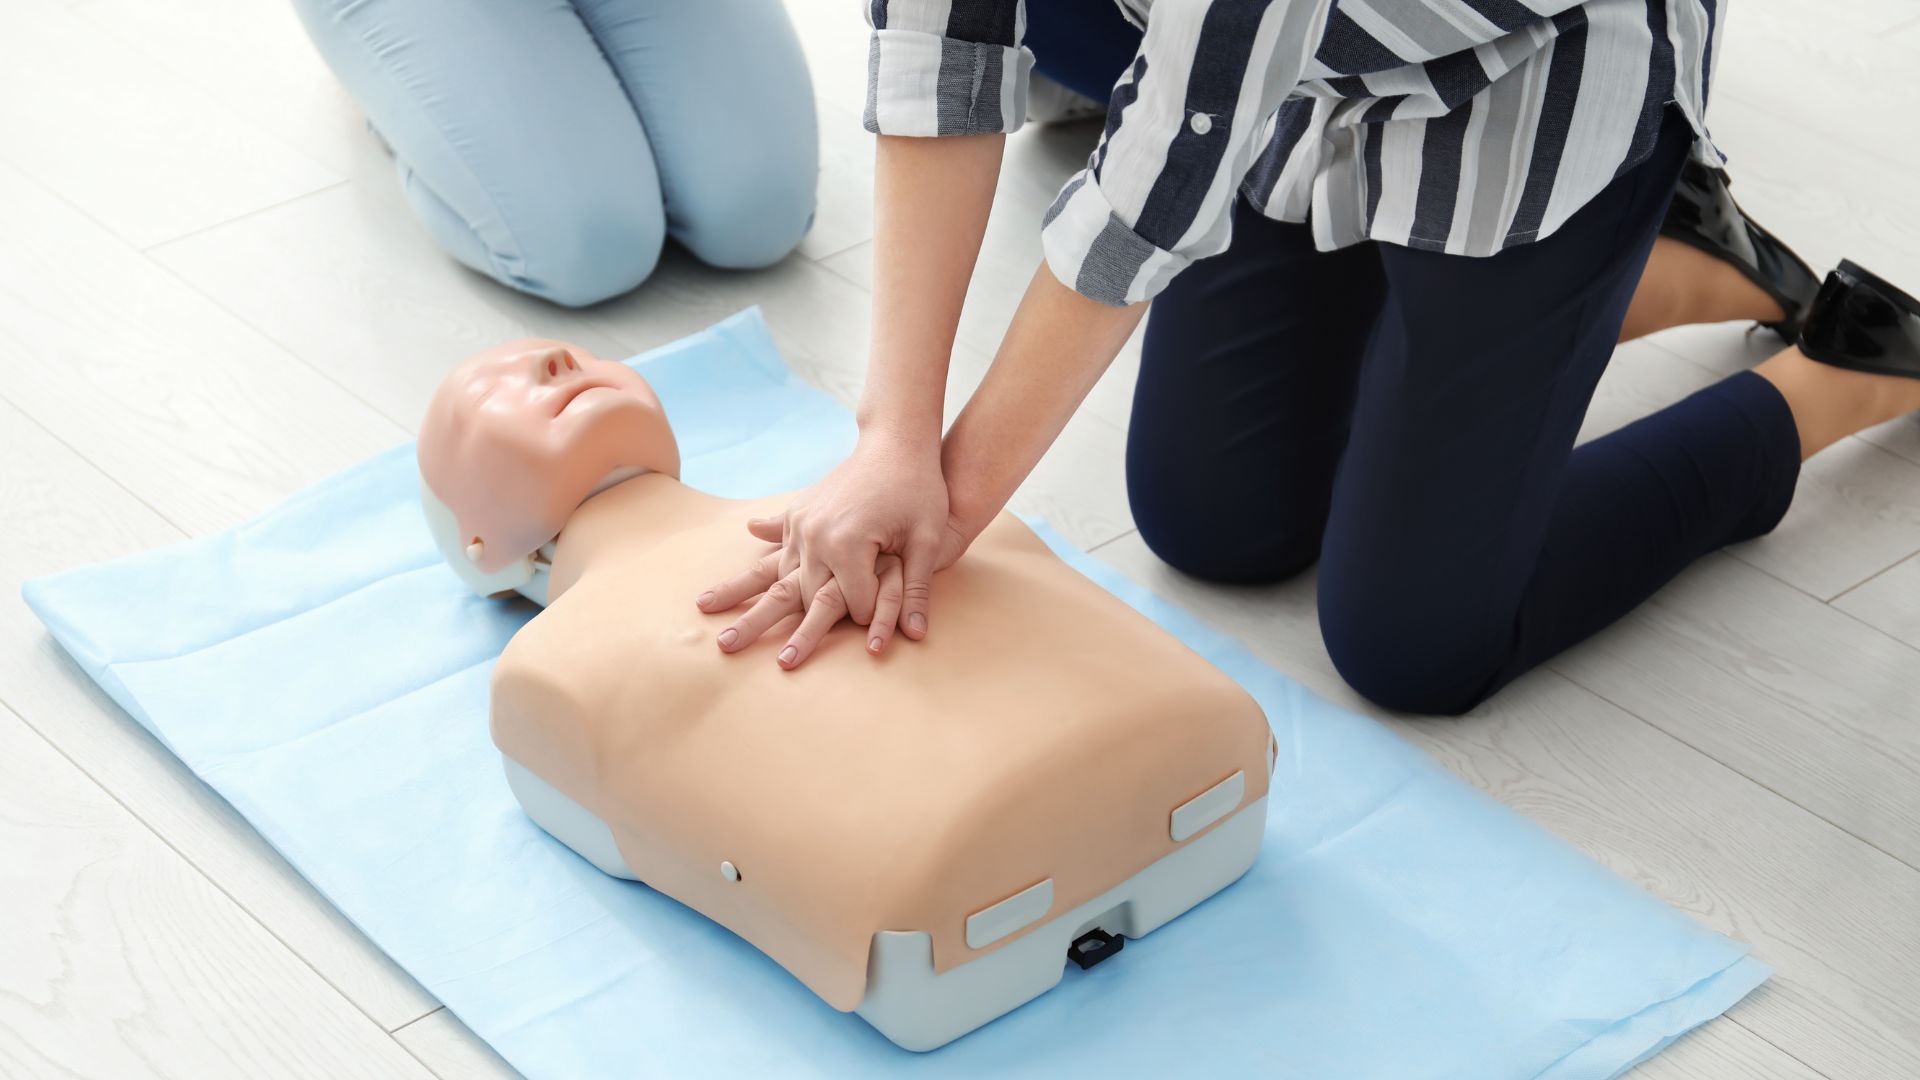 Common mistakes when preforming CPR